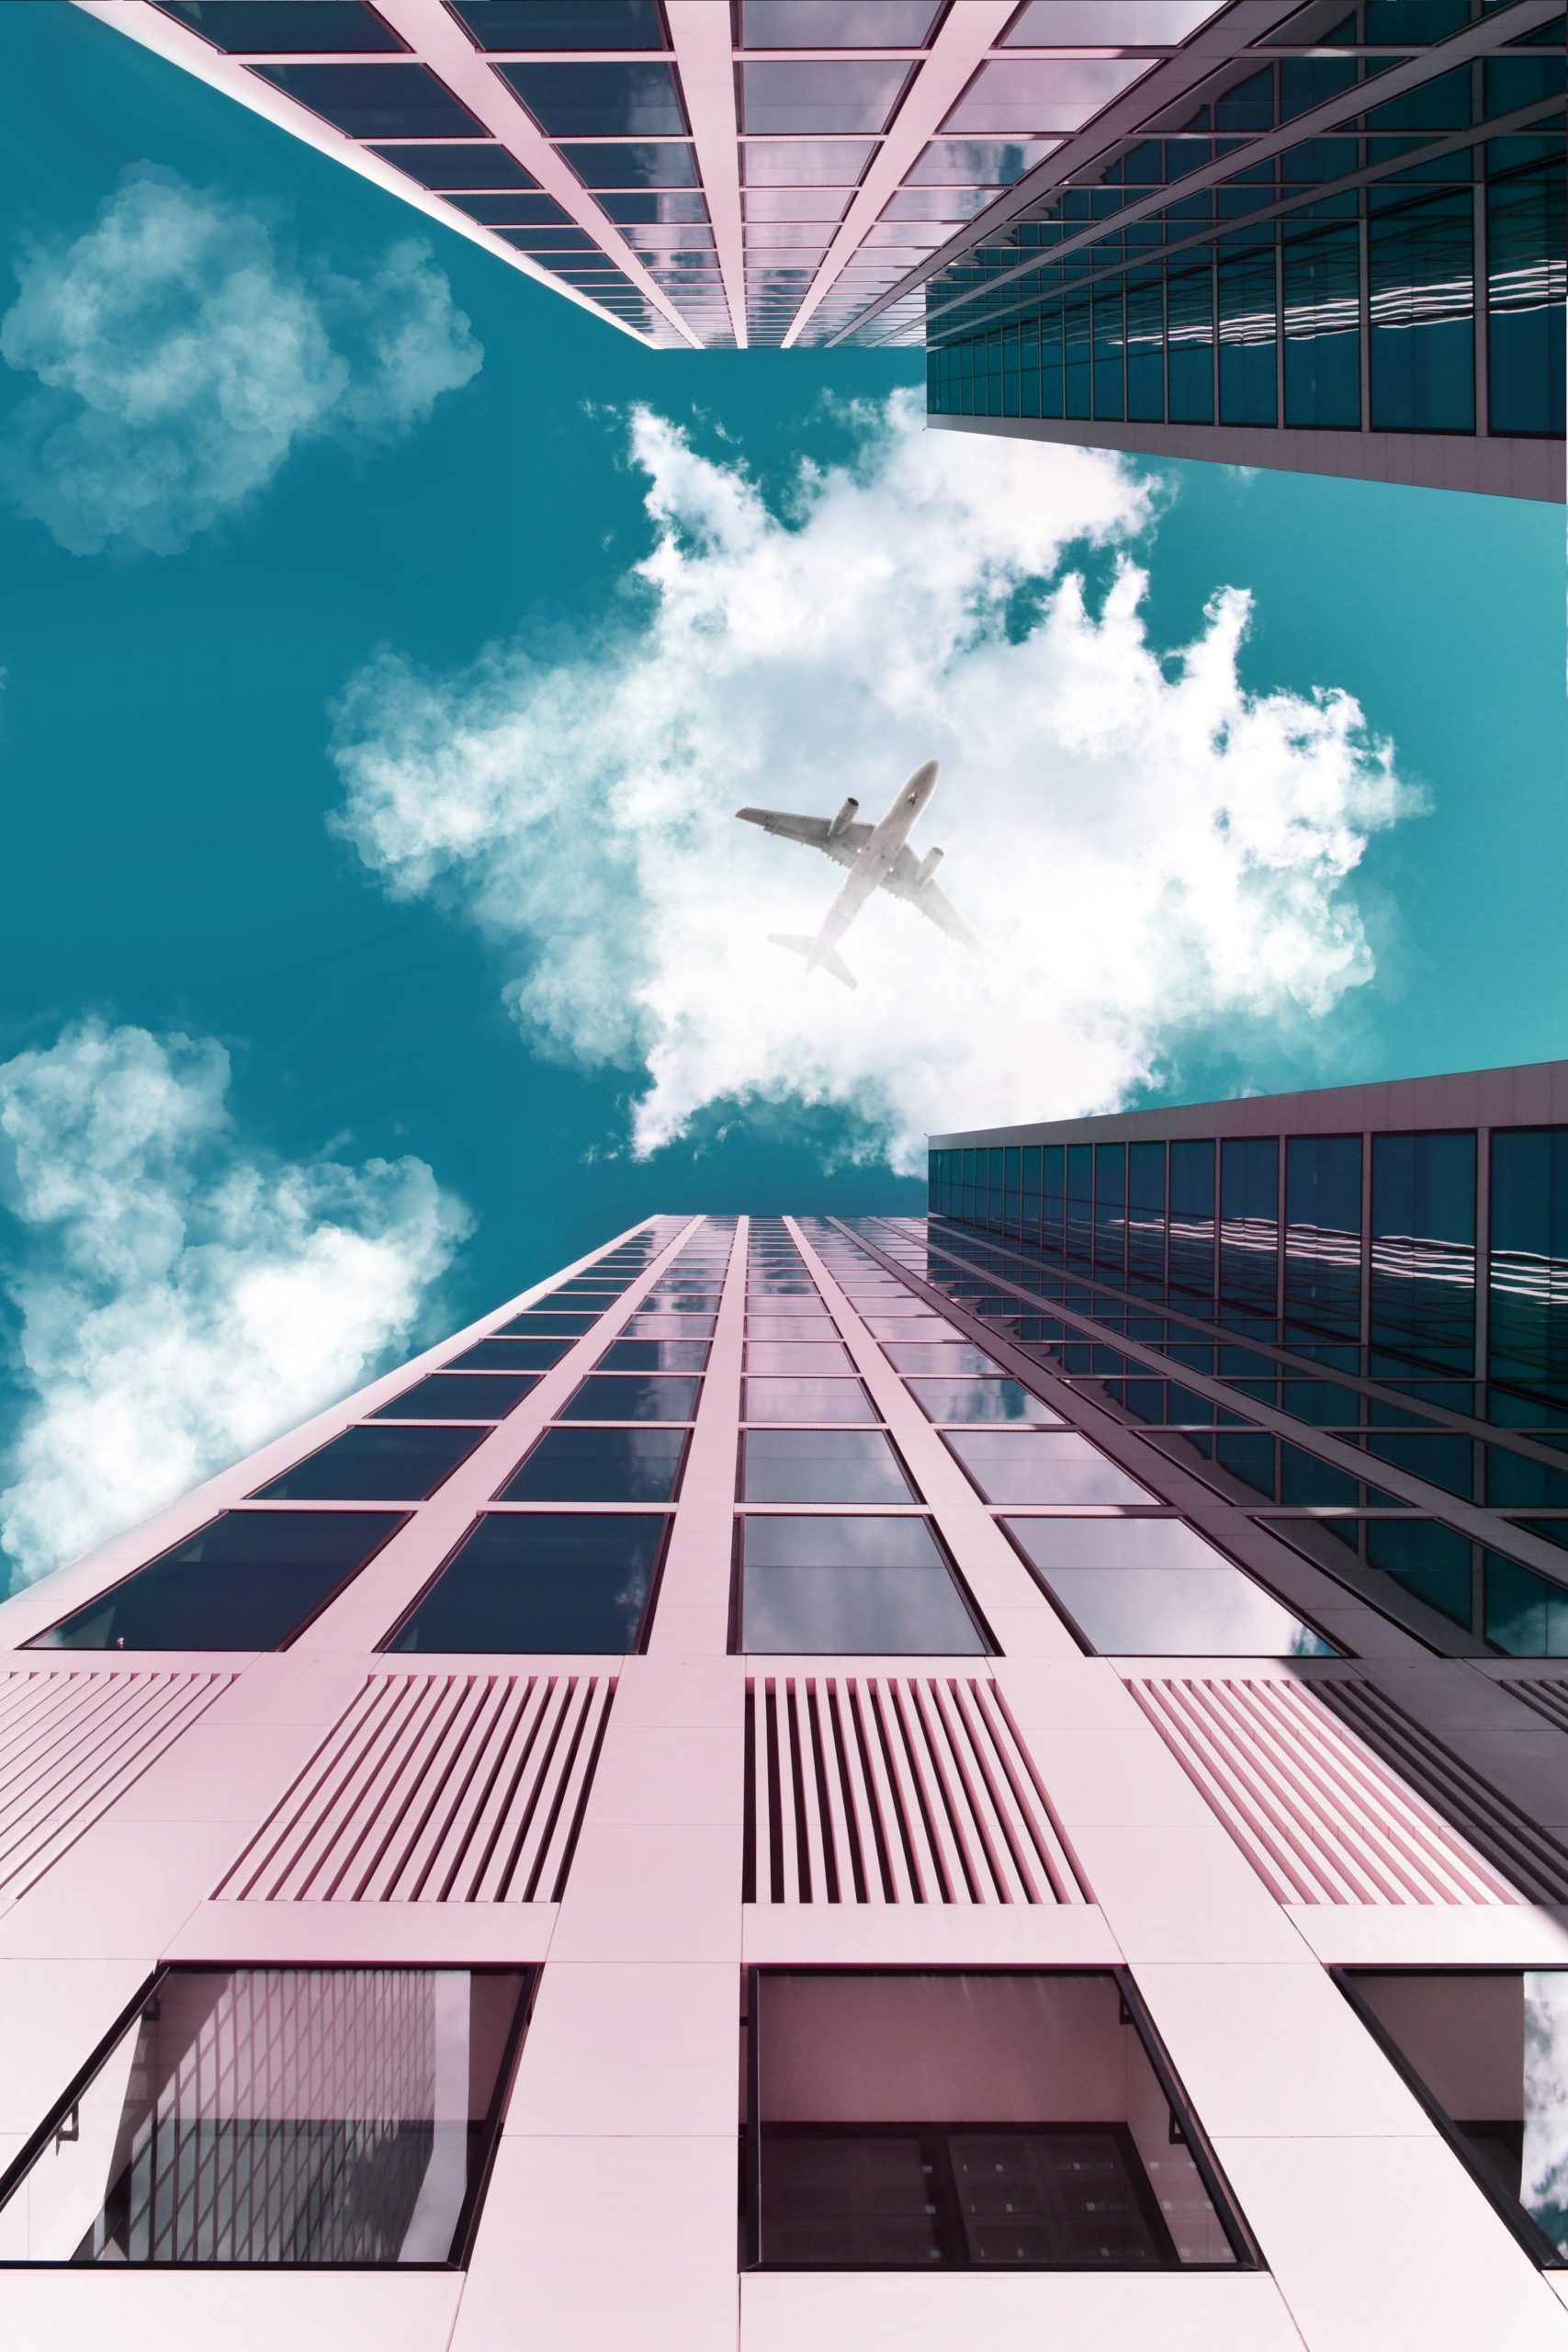 Photograph of an airplane flying over buildings in Miami